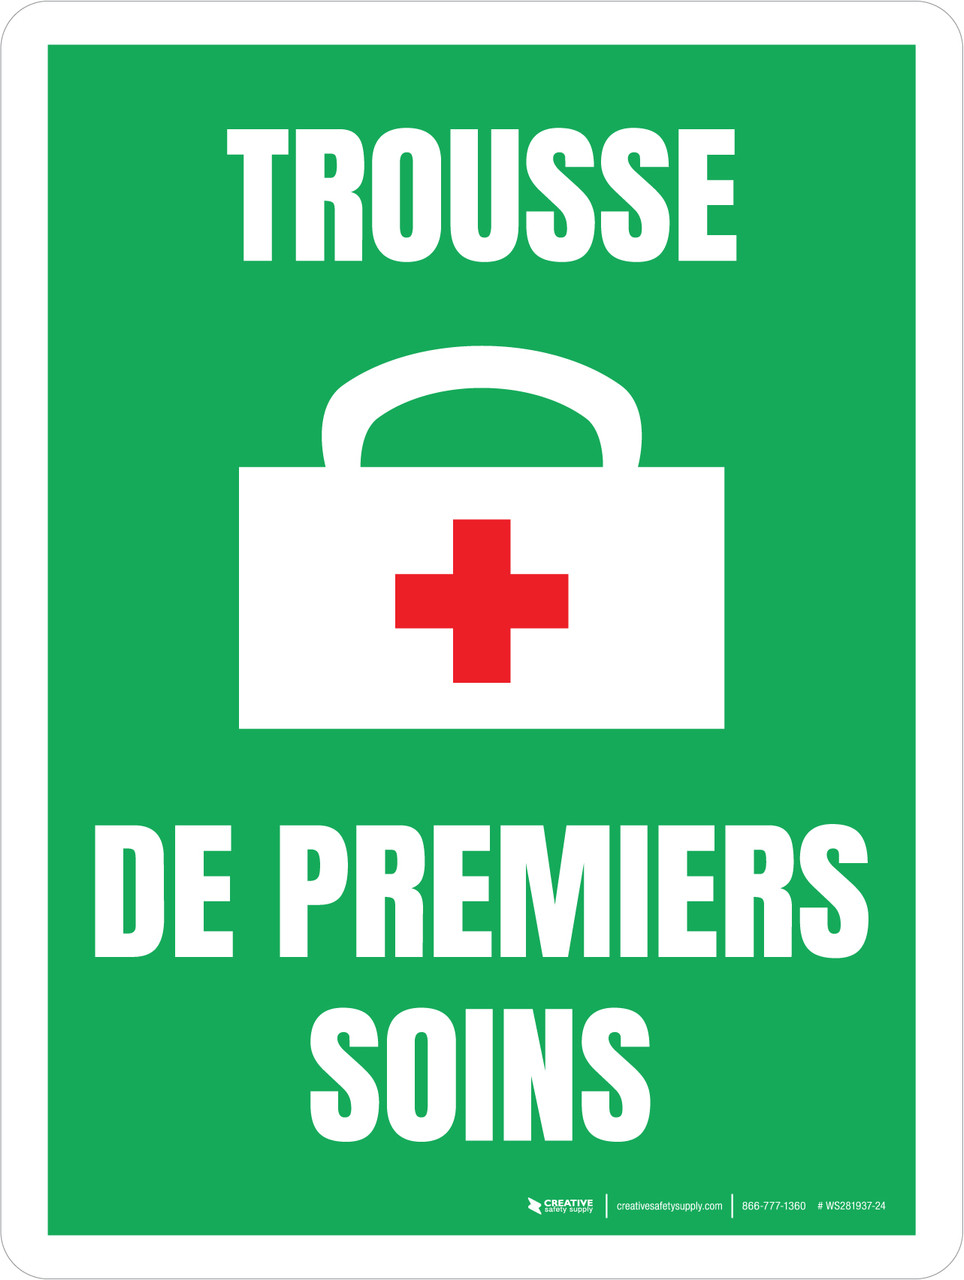 Trousse de premiers Secours croix-rouge (First Aid Kit with red cross)  Portrait French - Wall Sign